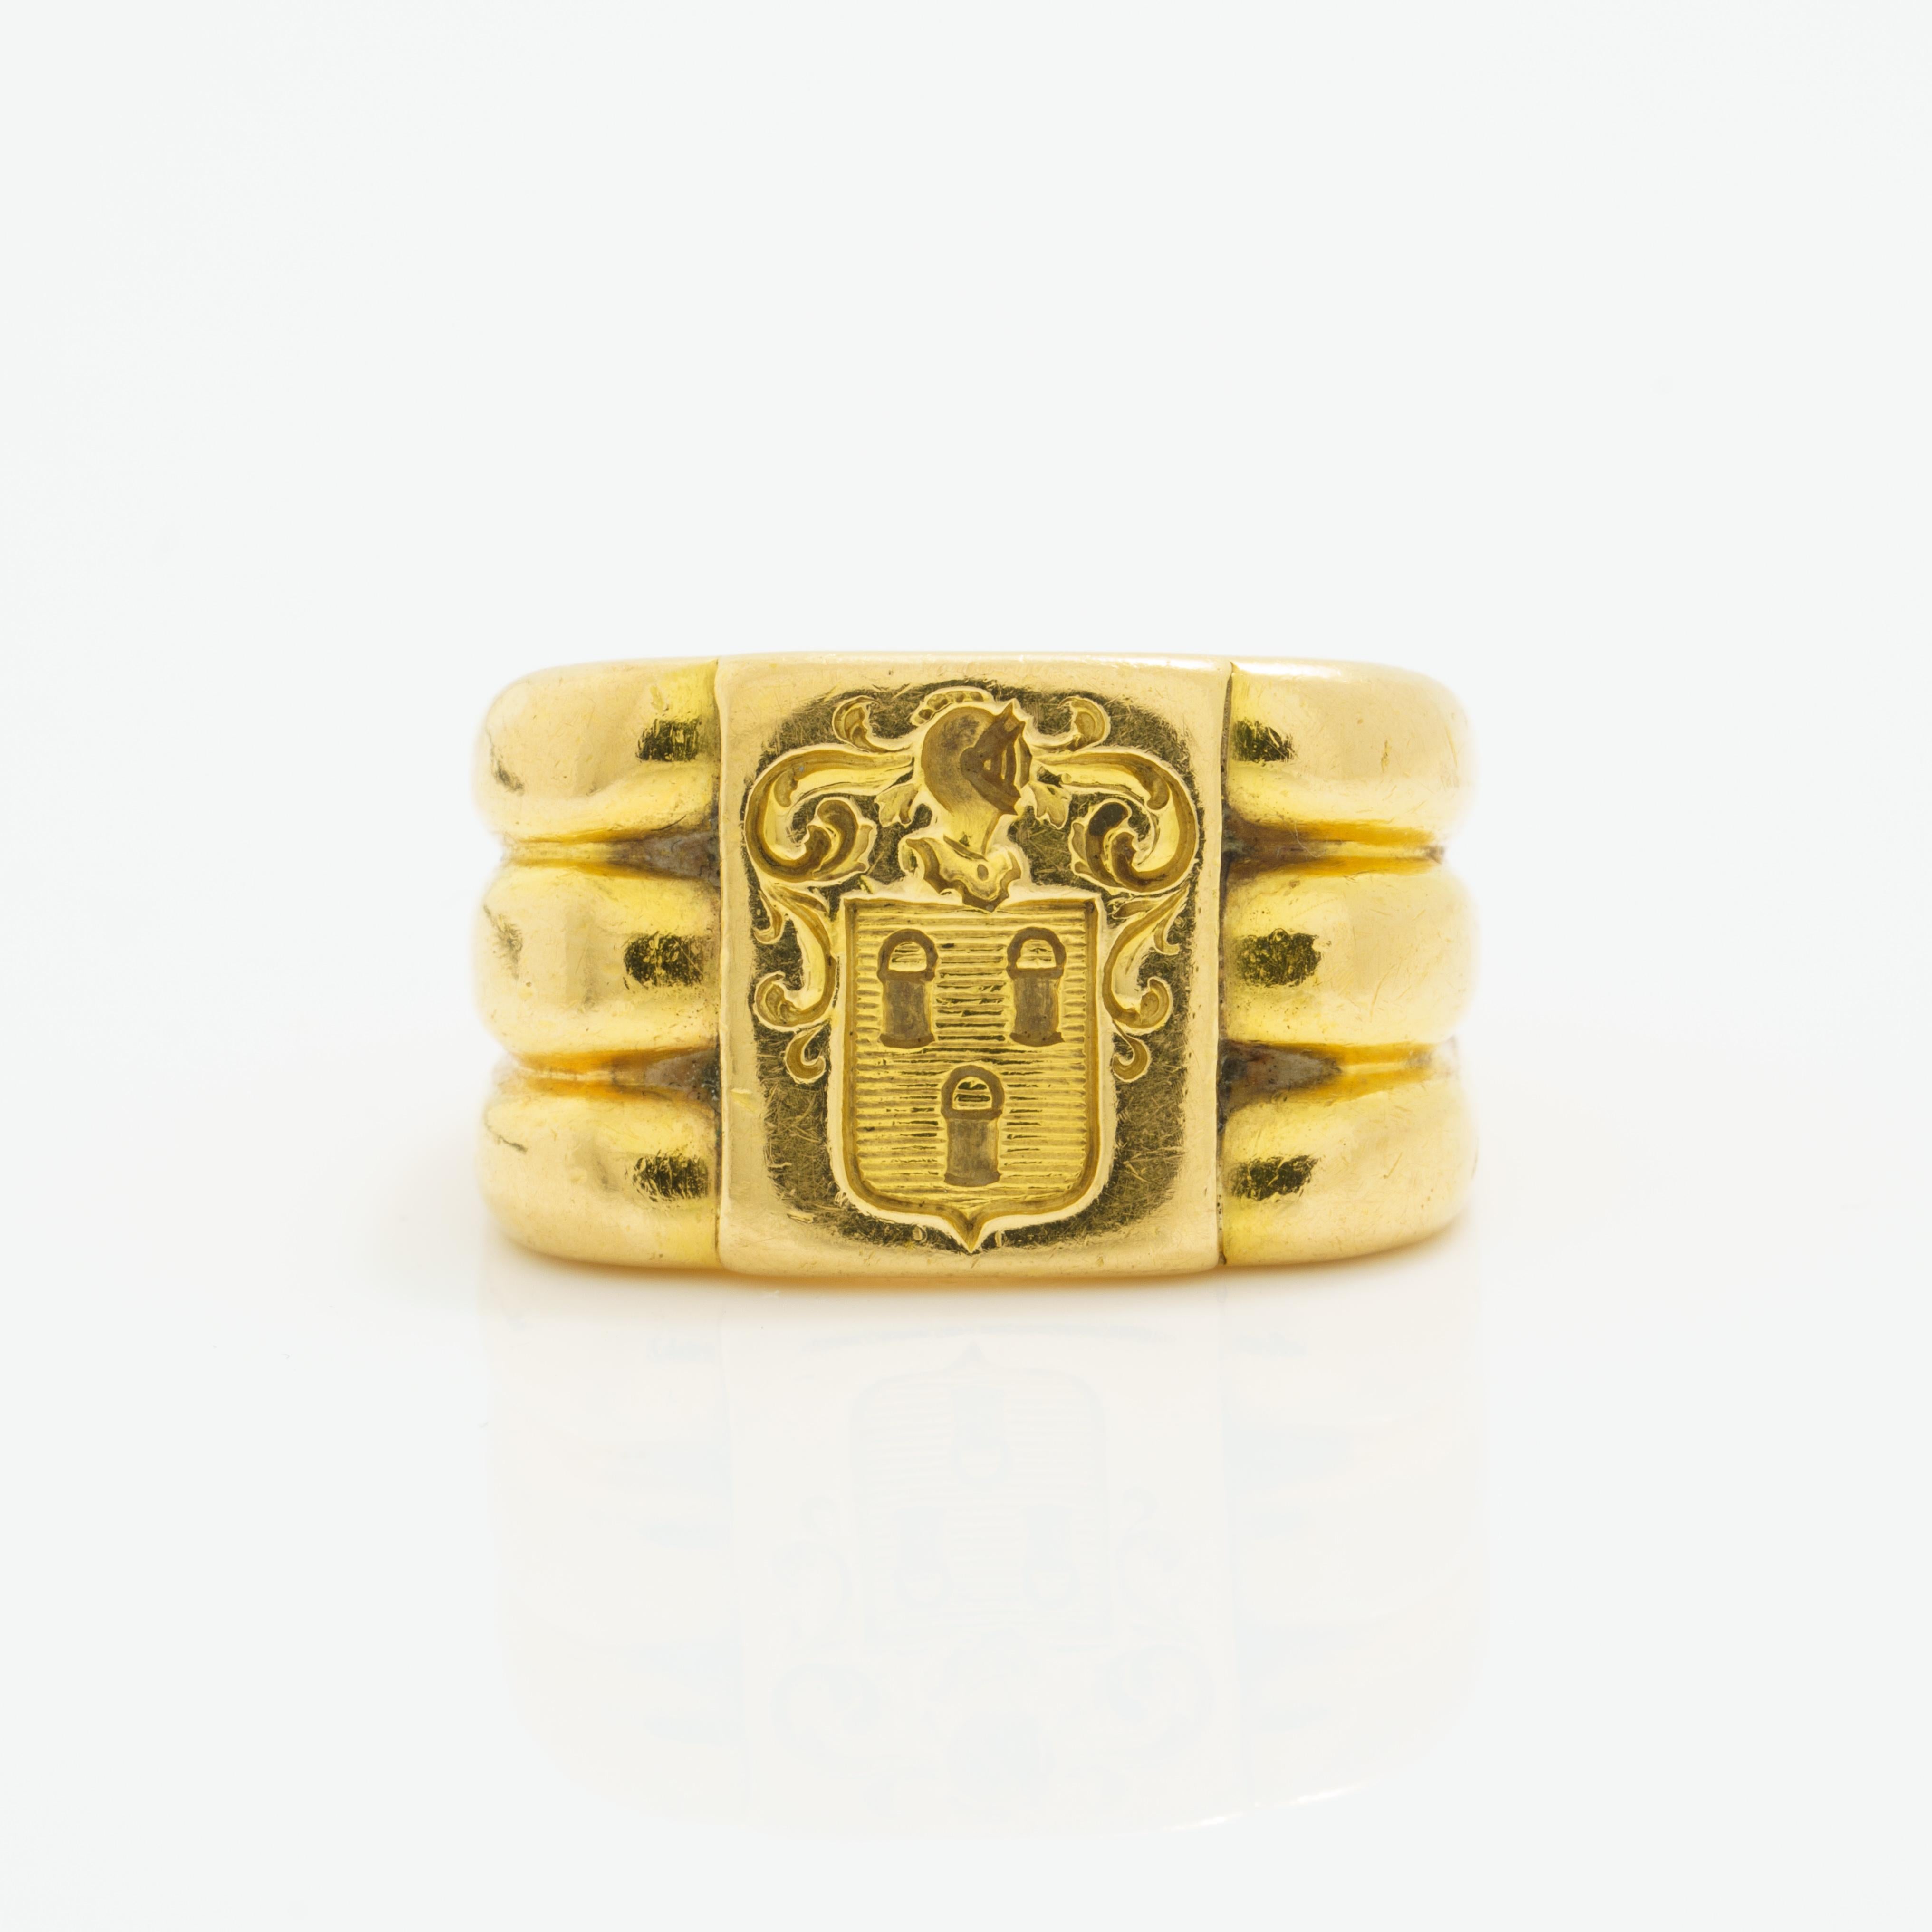 Vintage Retro French 18 Karat Signet Coat of Arms Ring c.1940's
13.6 grams
Solid 18 Karat Gold
Beautiful vintage patina. Heavy.

Size 6.5
French Hallmarks